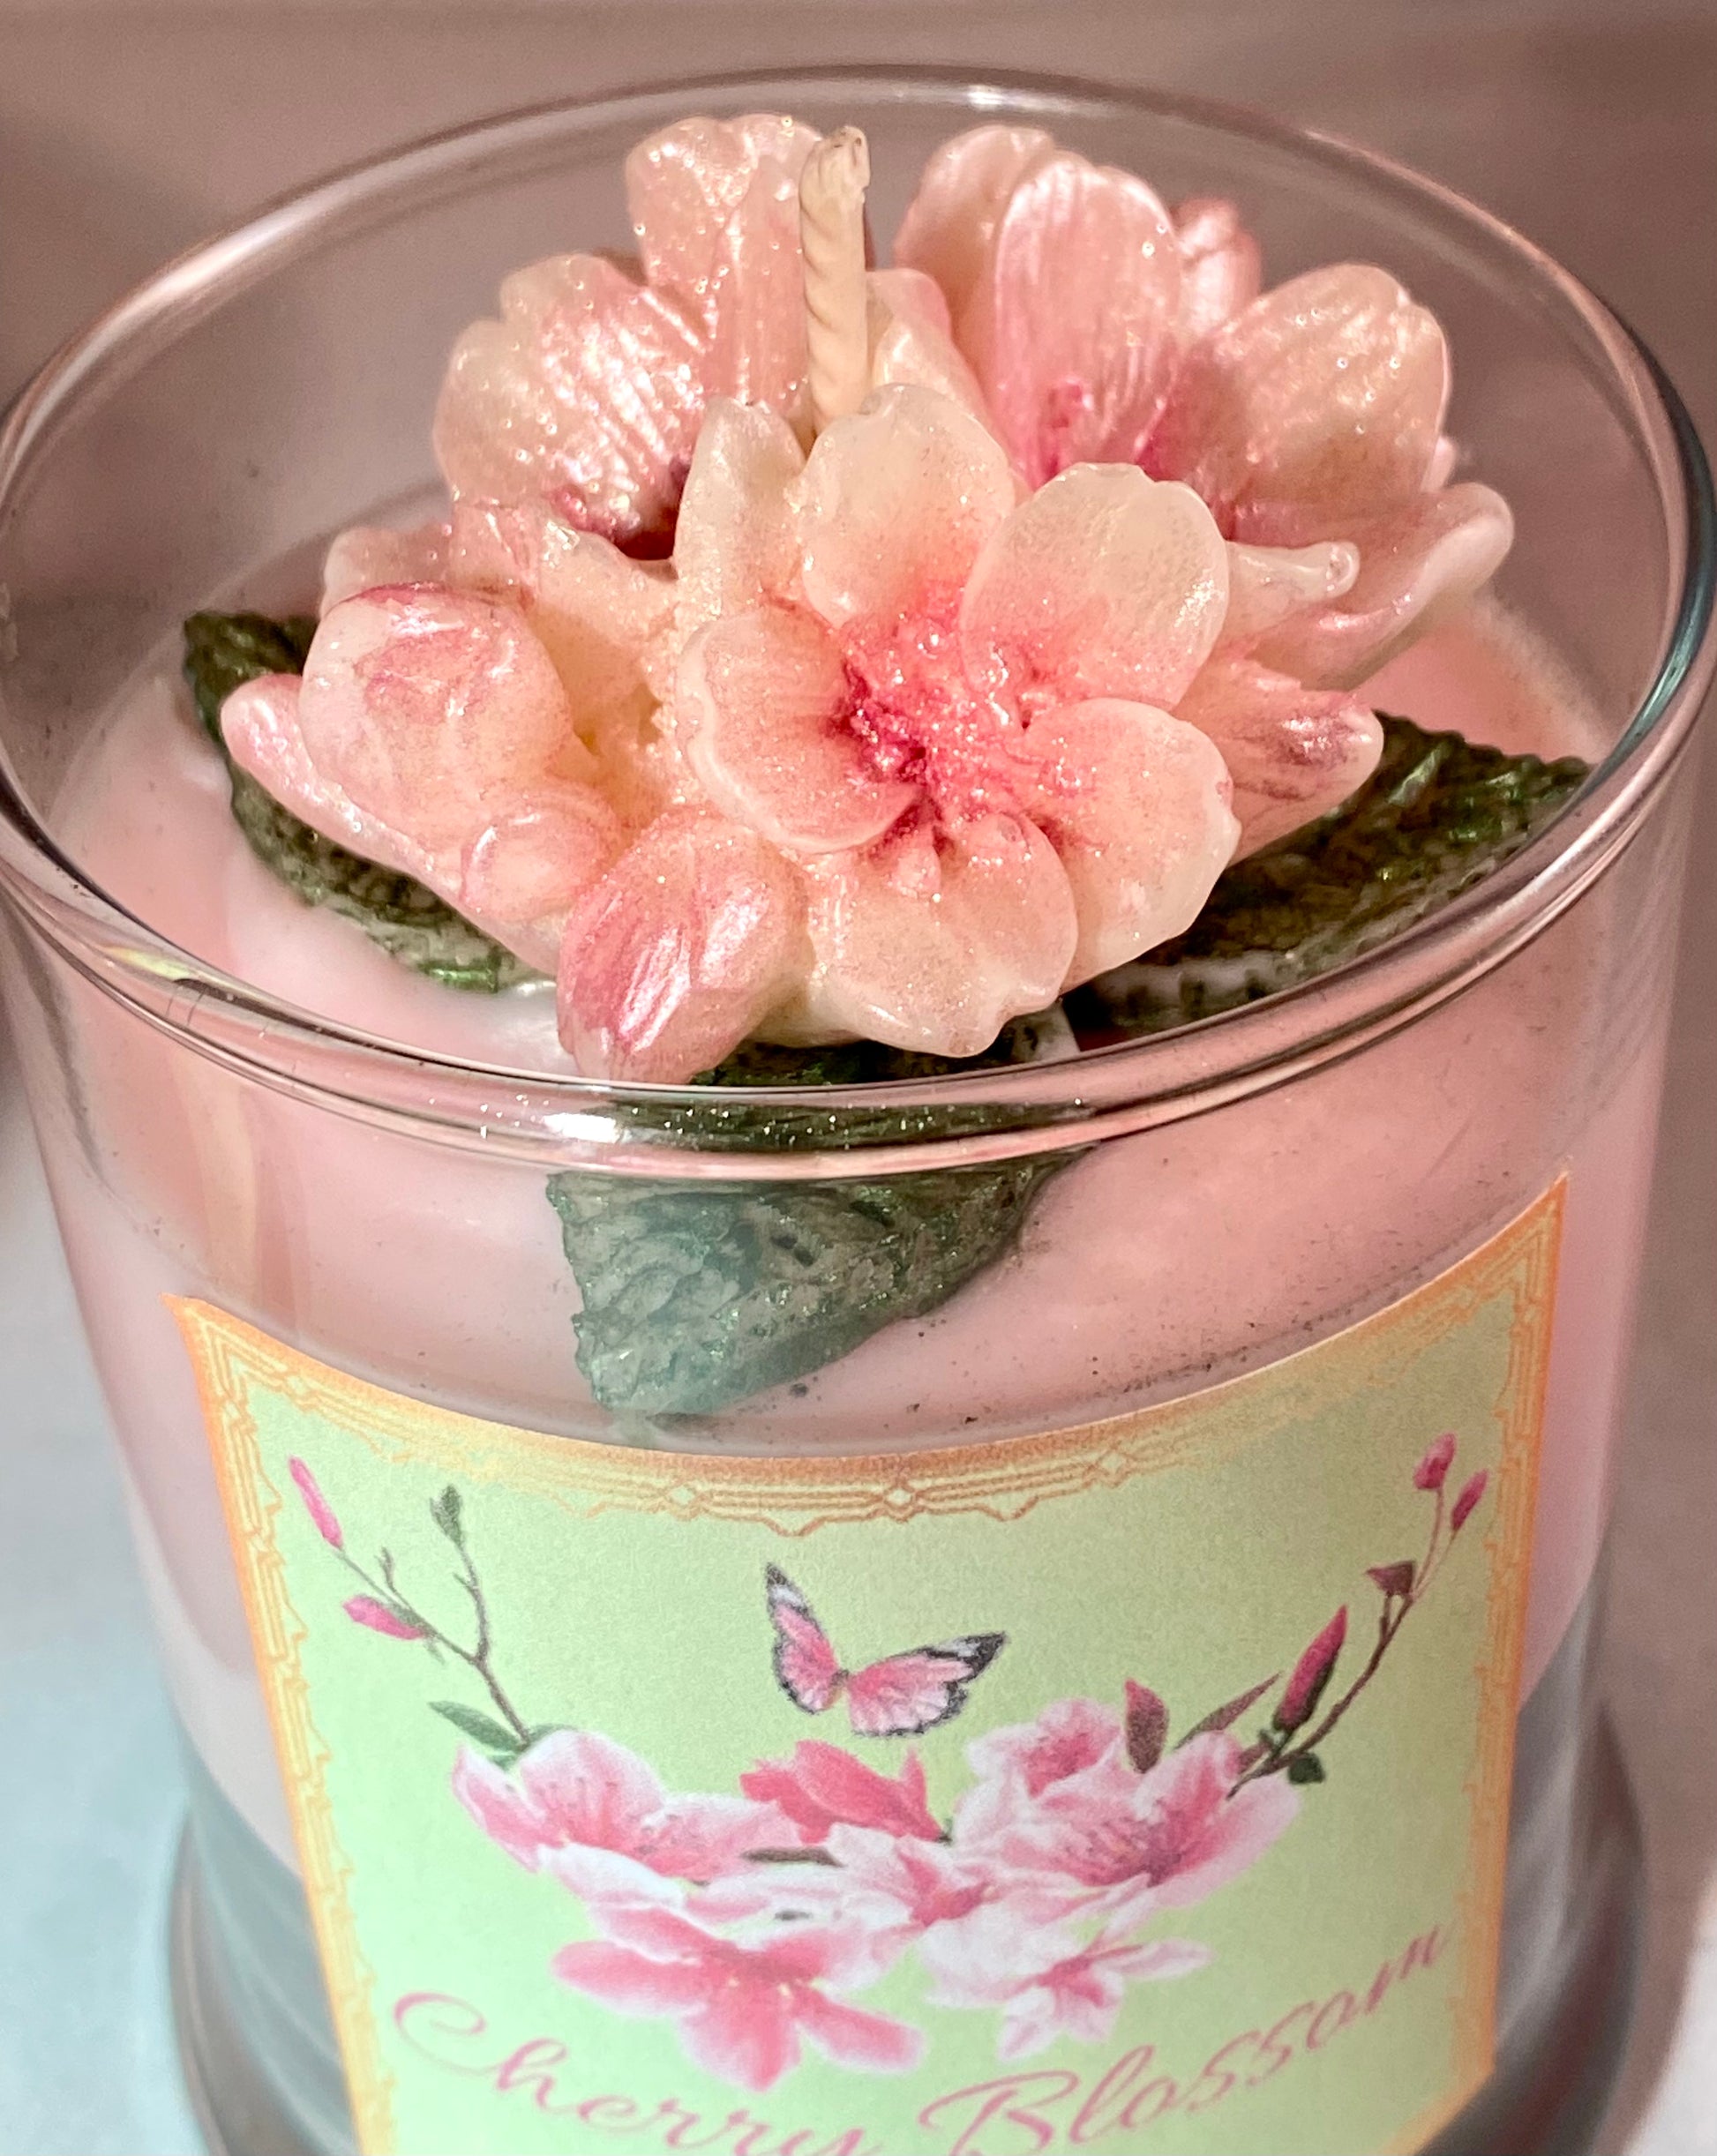 Cherry Blossom Candle – Sand Hill Candles & melts